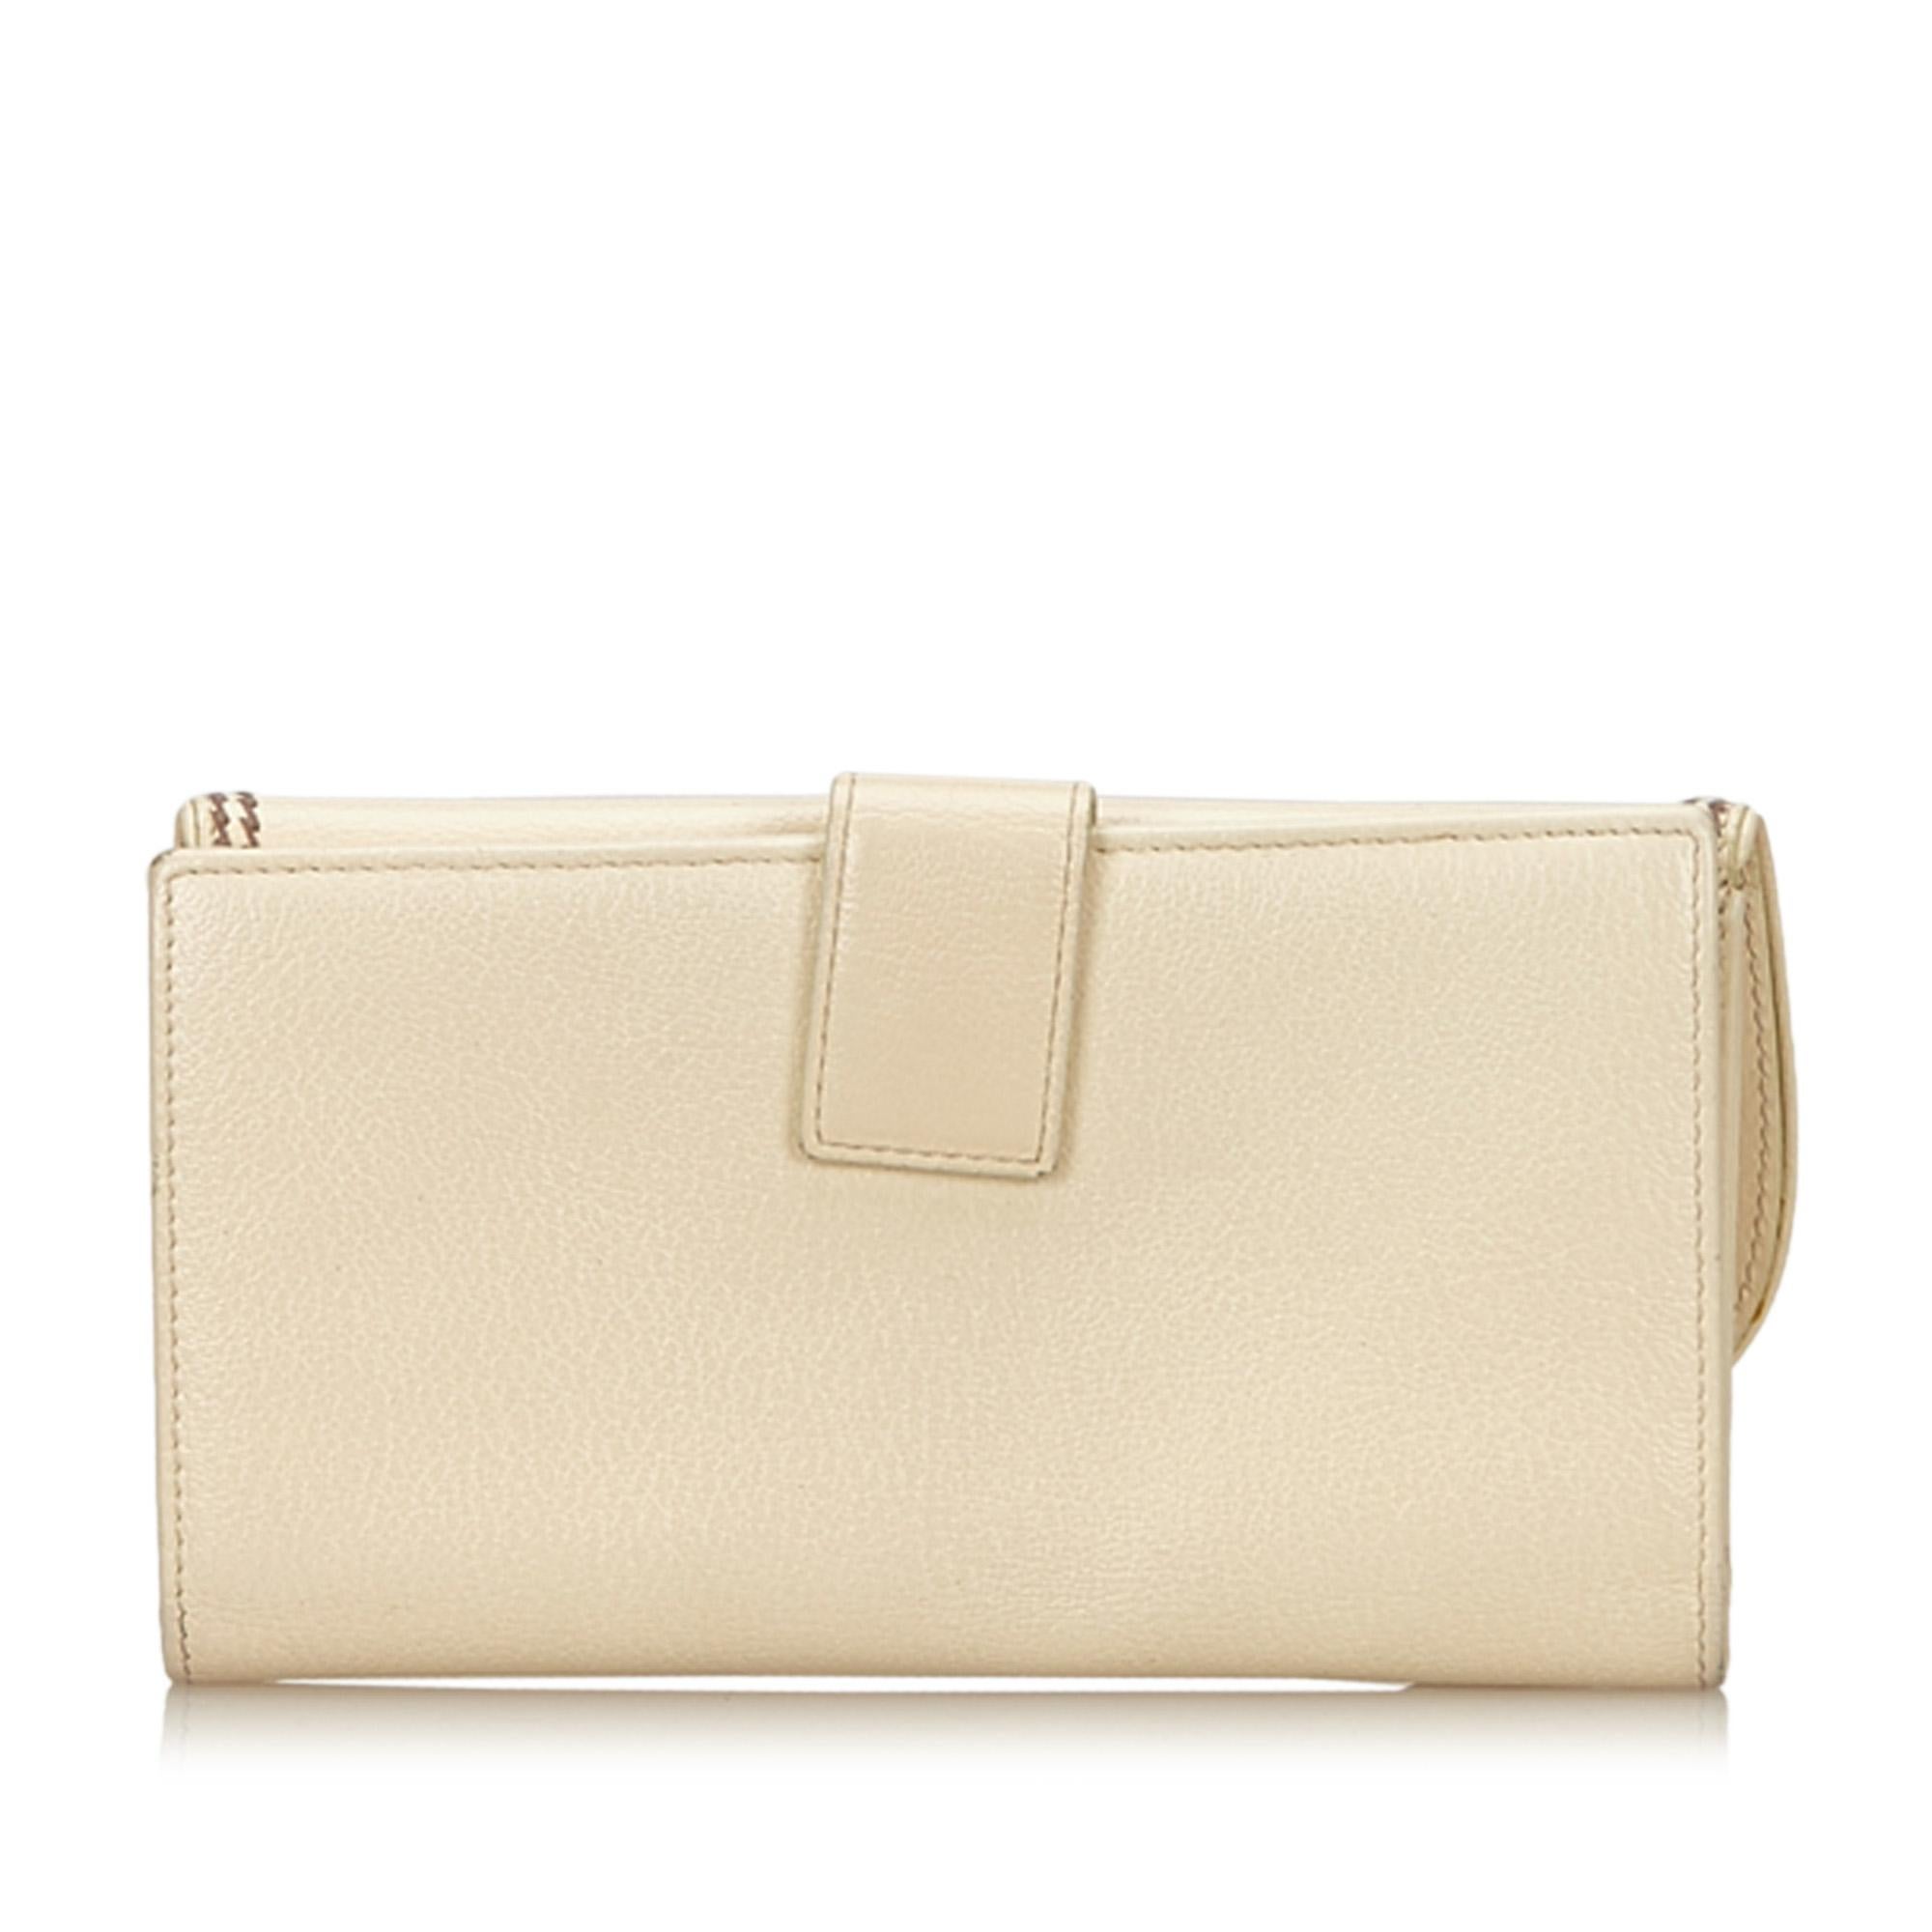 Dior White Leather Saddle Wallet In Good Condition For Sale In Orlando, FL